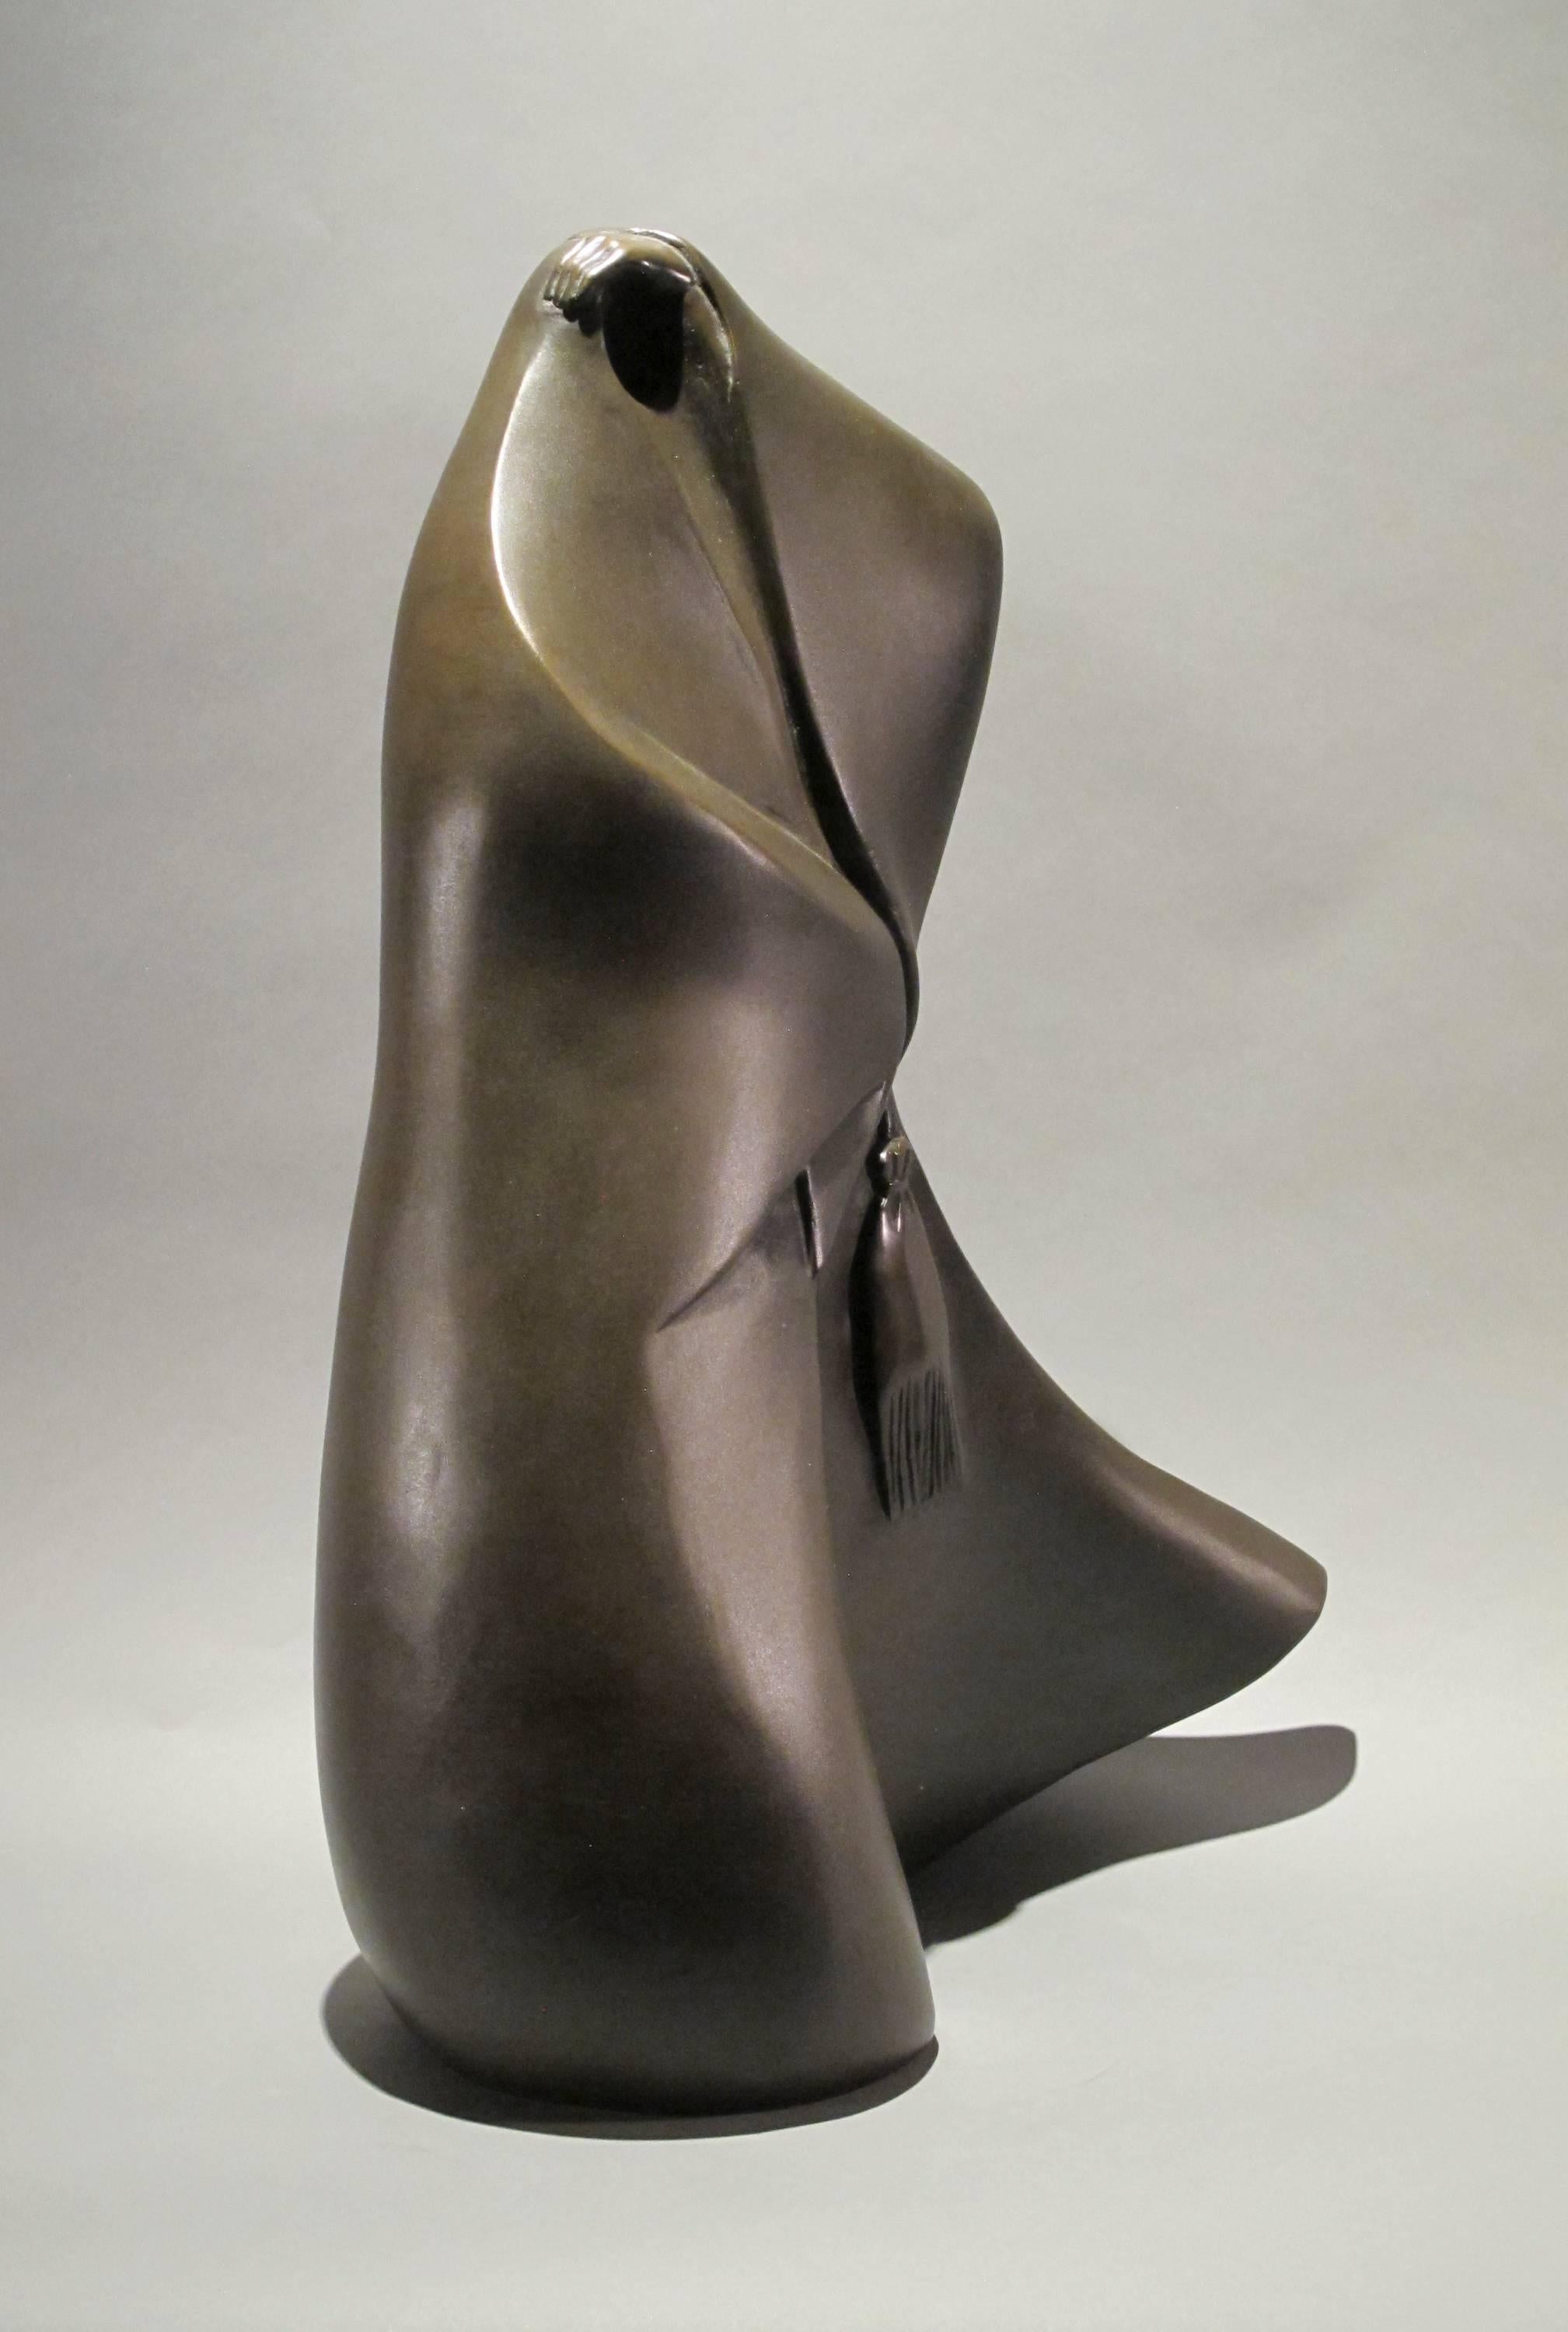 They're Coming, Allan Houser bronze abstract figure, brown patina, life casting